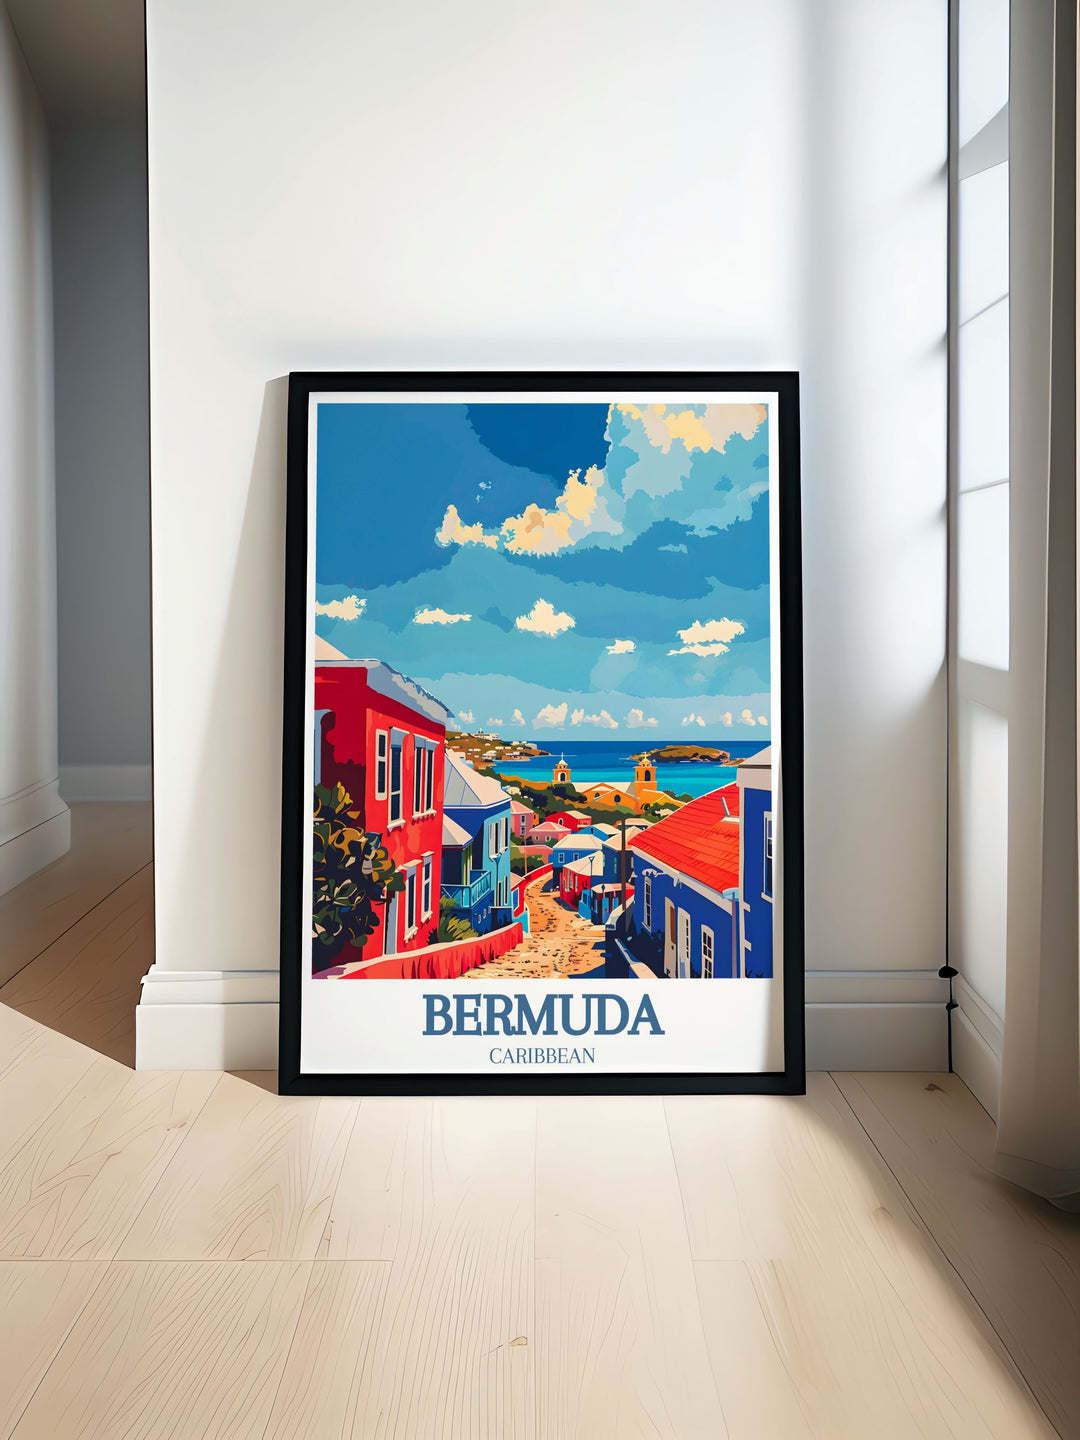 Captivating Bermuda poster featuring the historic Royal Naval Dockyard and the iconic Clocktower Mall, showcasing the islands rich maritime history and charm. Perfect for adding a touch of elegance to your home decor.